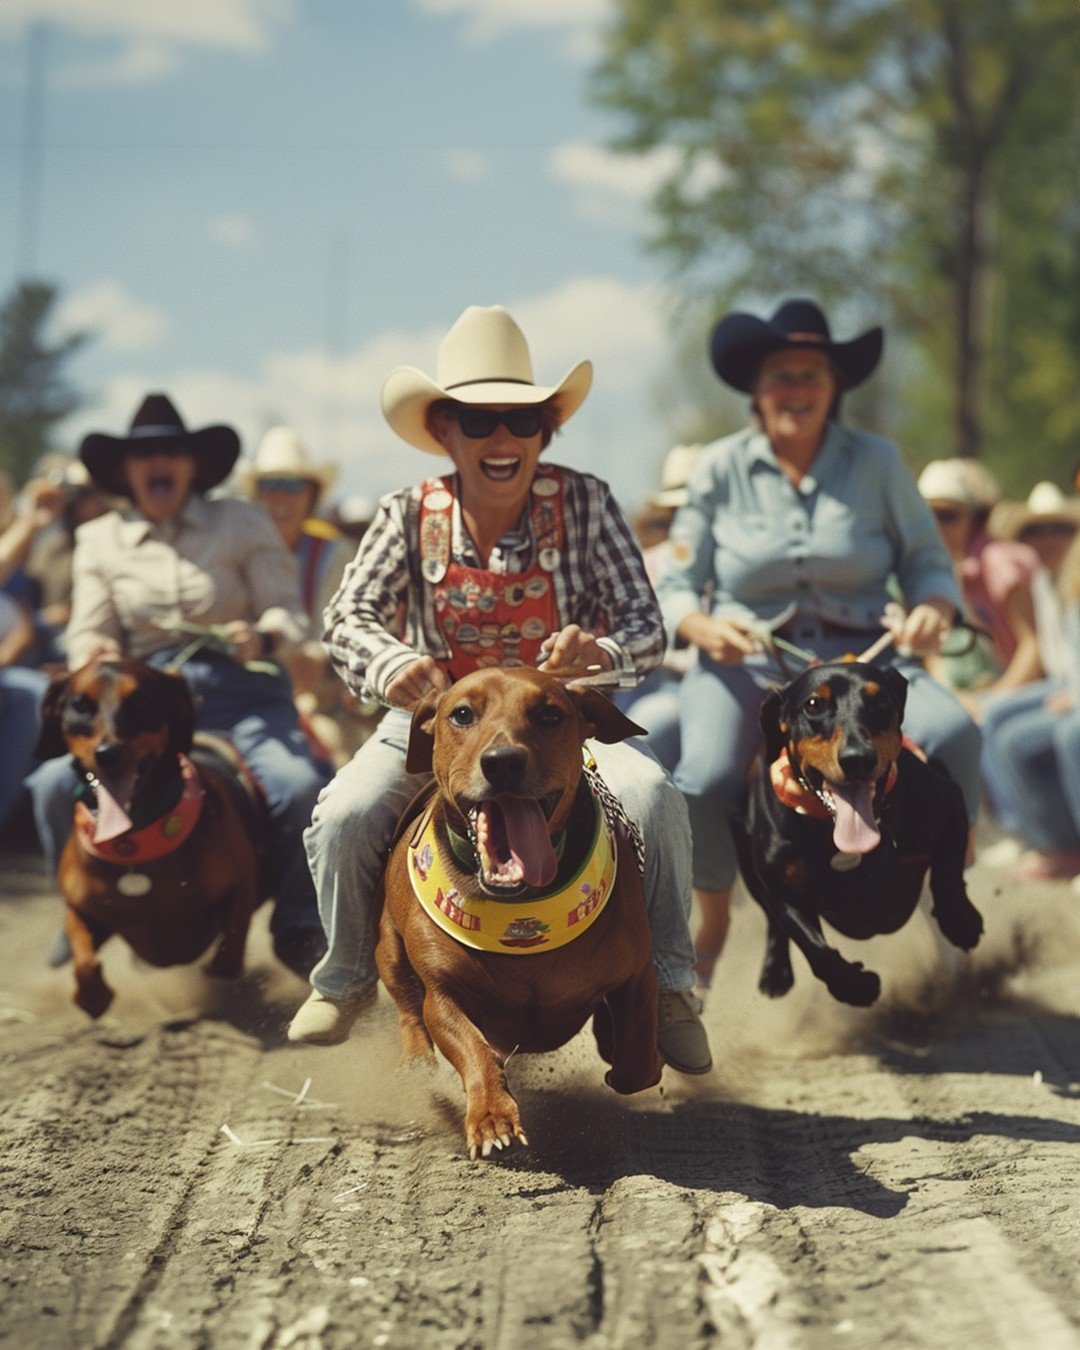 So, educational content is all well and good, but how about excited happy people with cowboy hats Riding on large dachshunds in a race, realistic disposable camera photo, aerial view, crowd cheering, fans --ar 4:5 ?

.
.
.
.
.
.
#excited #happy #peop